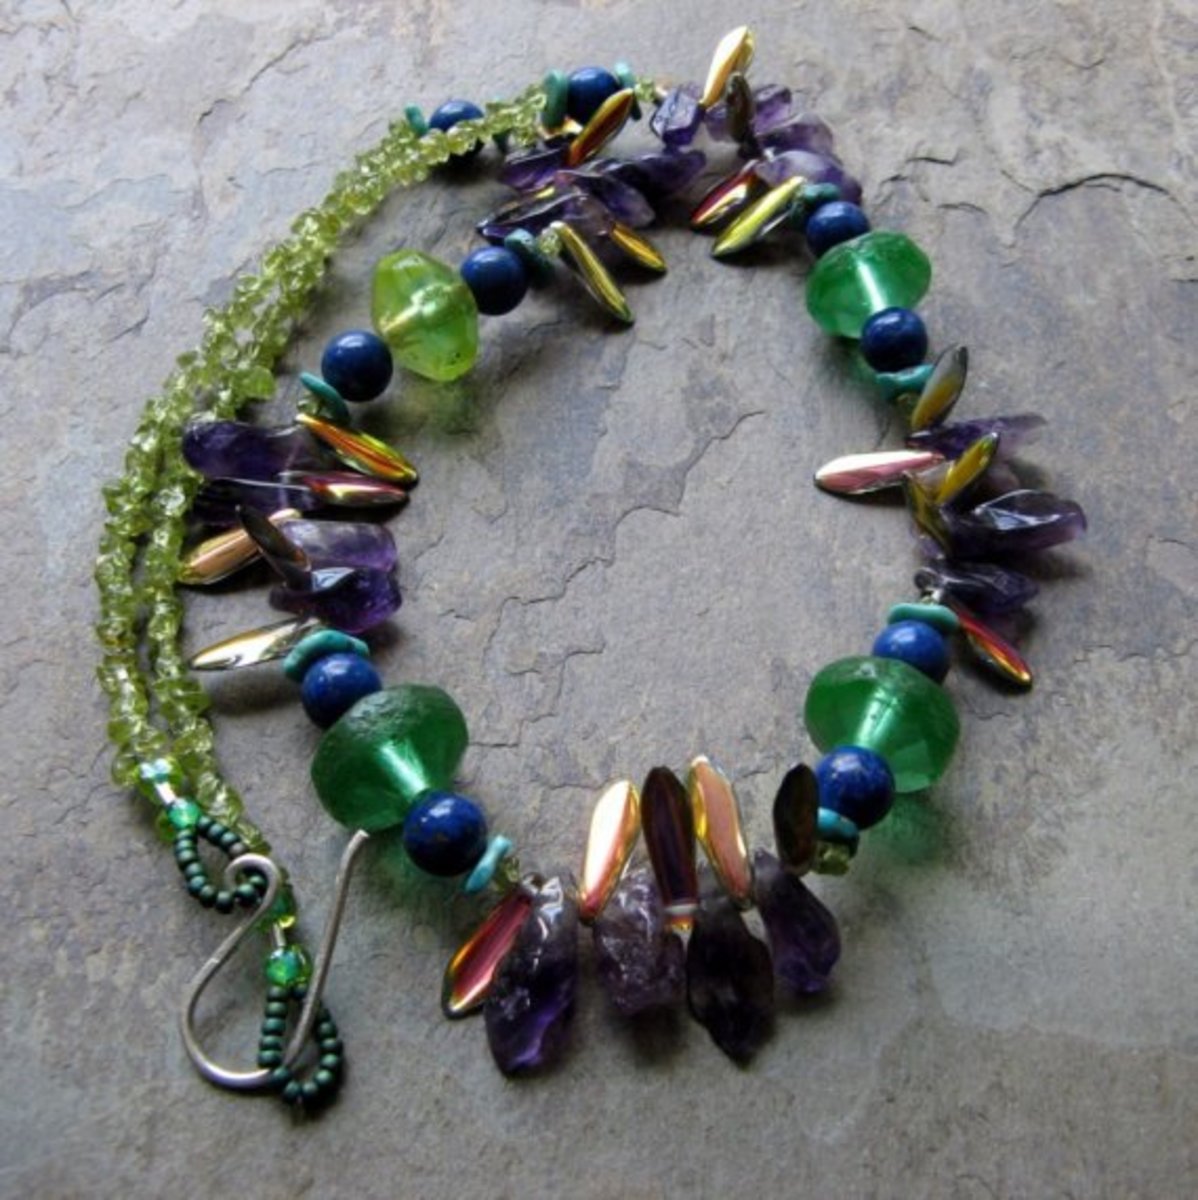 Consider mixing daggers with all sorts of other jewelry components such as gemstones or gemstone chips like Sarah does.